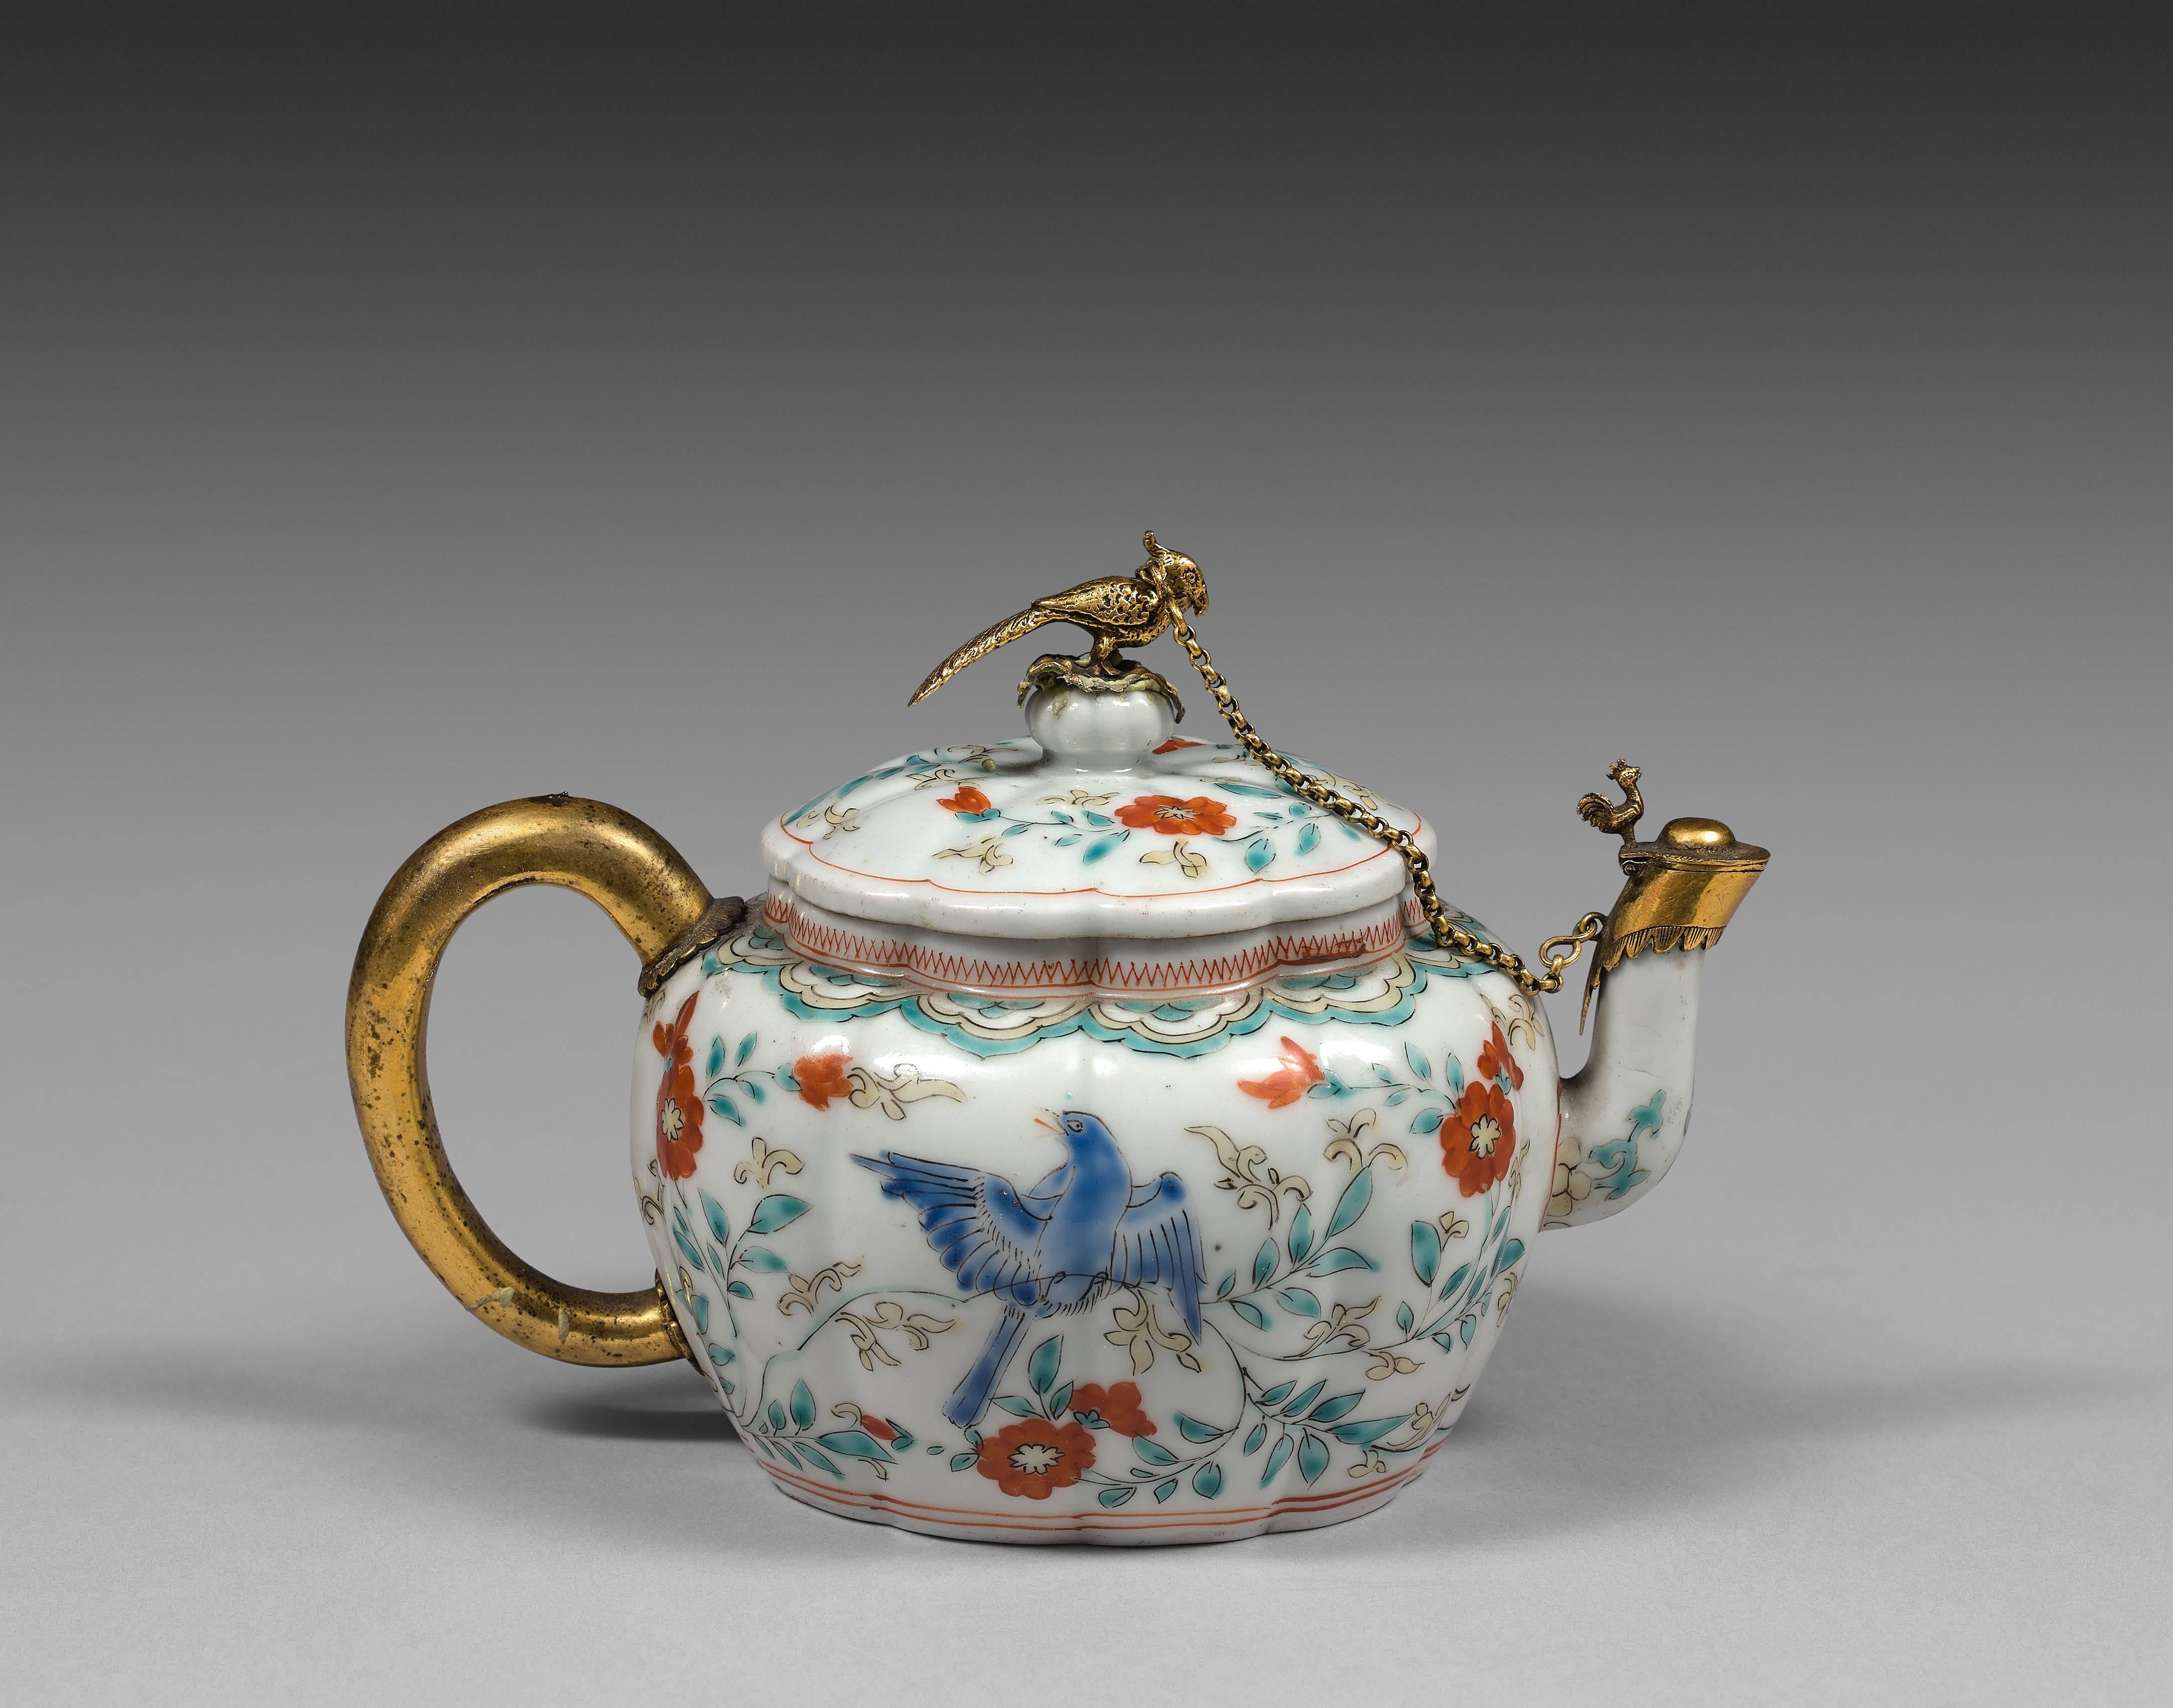 The Kakiemon porcelain lobed oval teapot with matching lid. The teapot decorated with birds among flowers in red-orange, blue, yellow, turquoise overglaze enamels. The teapot and lid enhanced by 17th century Dutch Fine silver-gilt mounts and handle.